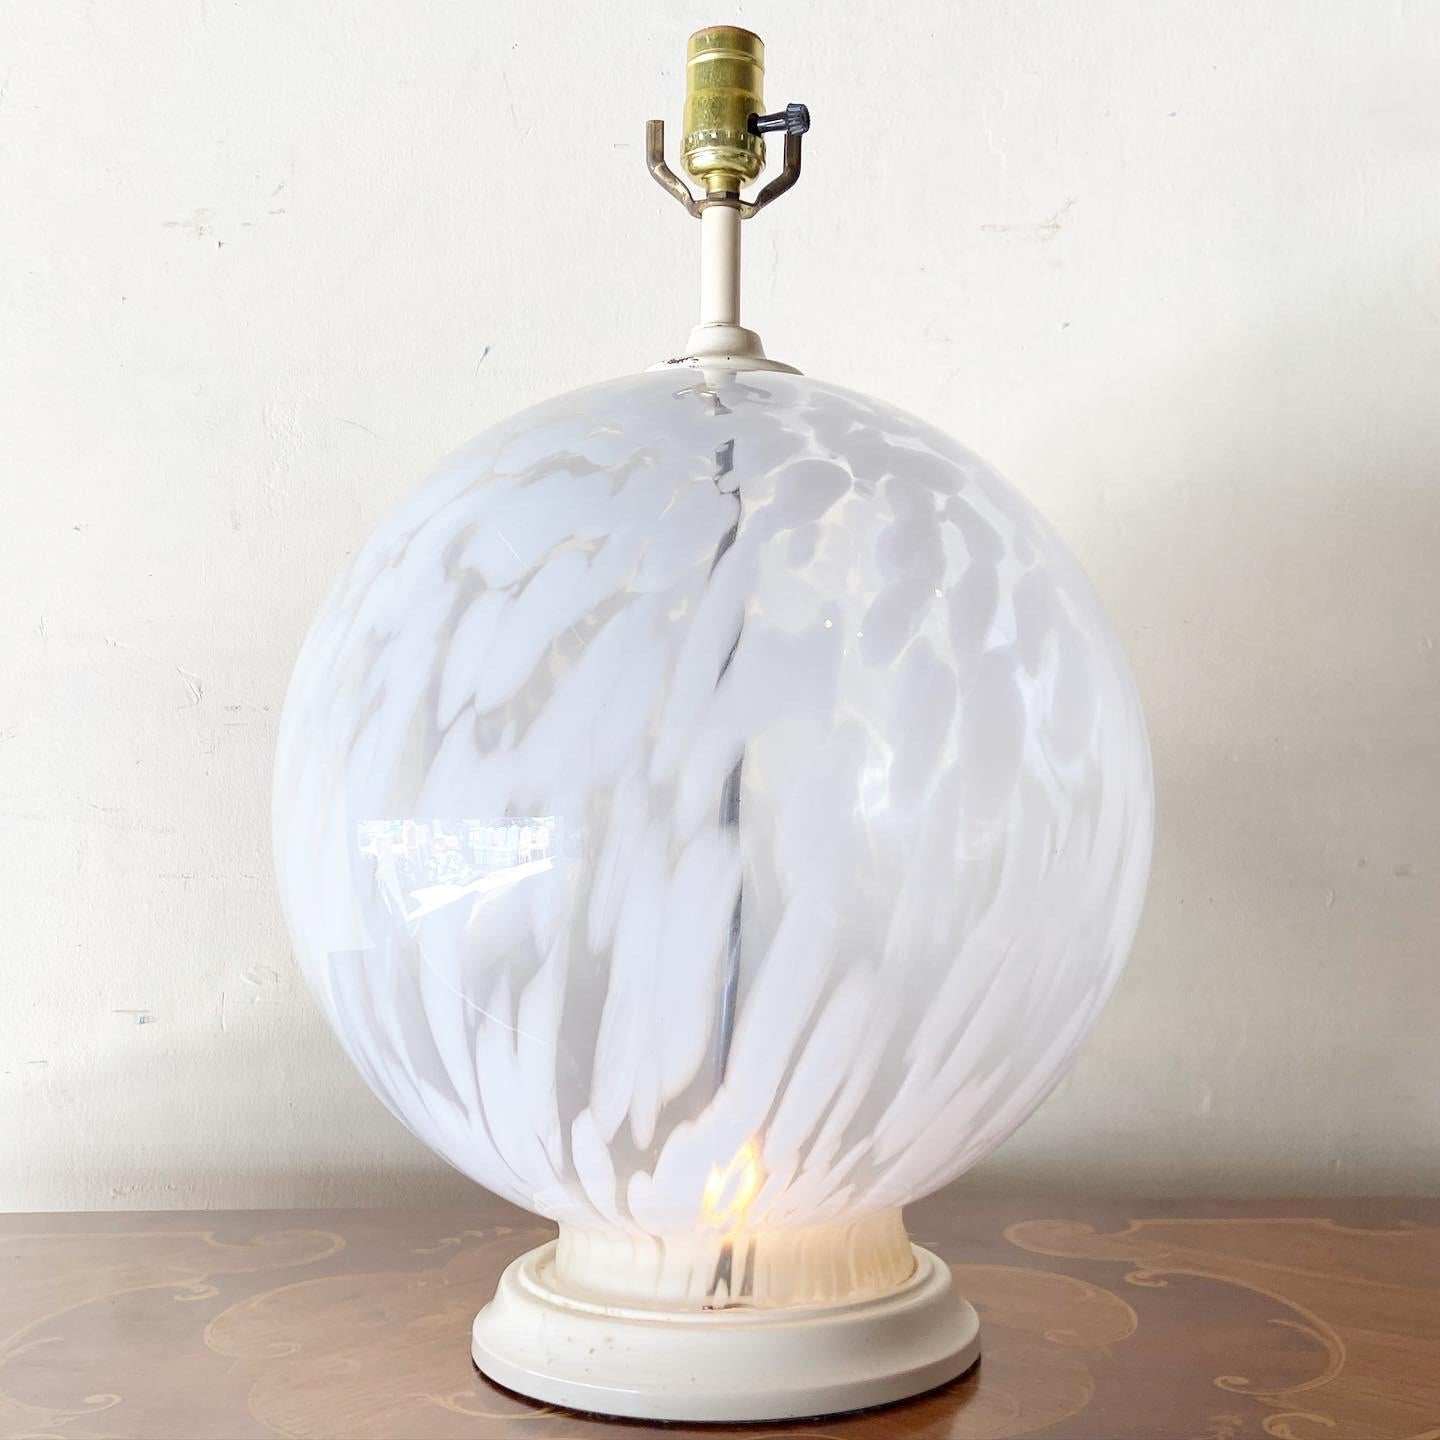 Exceptional postmodern Italian Murano glass table lamp. Features a large spherical white and transparent body.

4 settings: both lights, top light, bottom light, off